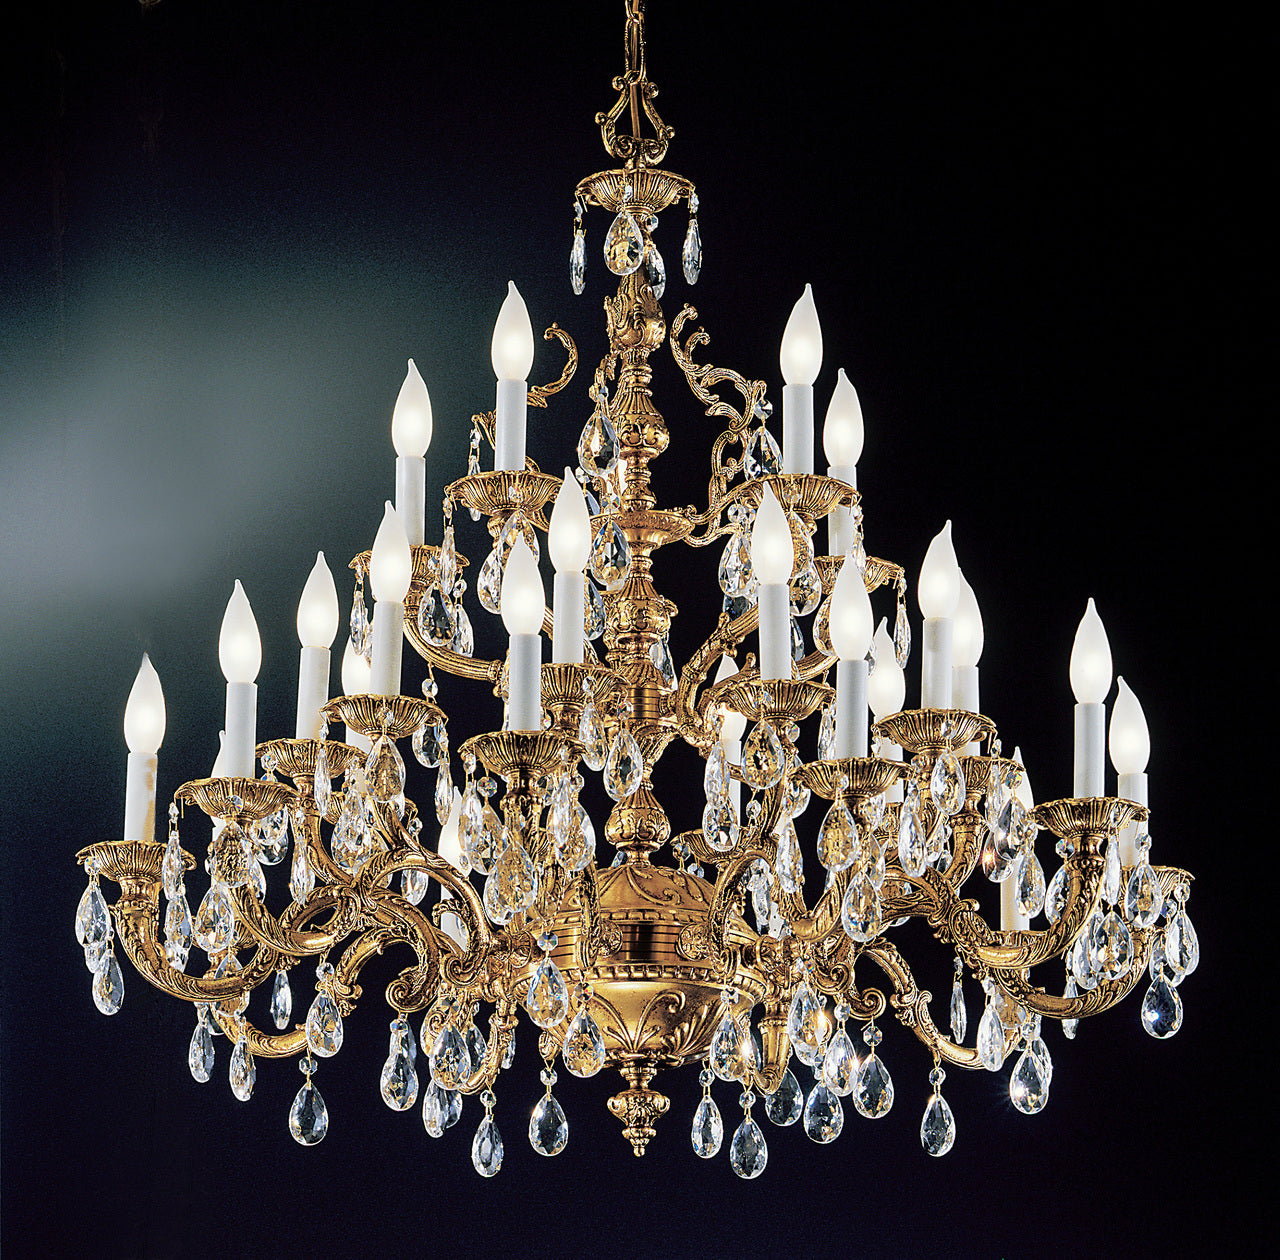 Classic Lighting 5525 OWB SGT Barcelona Crystal/Cast Brass Chandelier in Olde World Bronze (Imported from Spain)